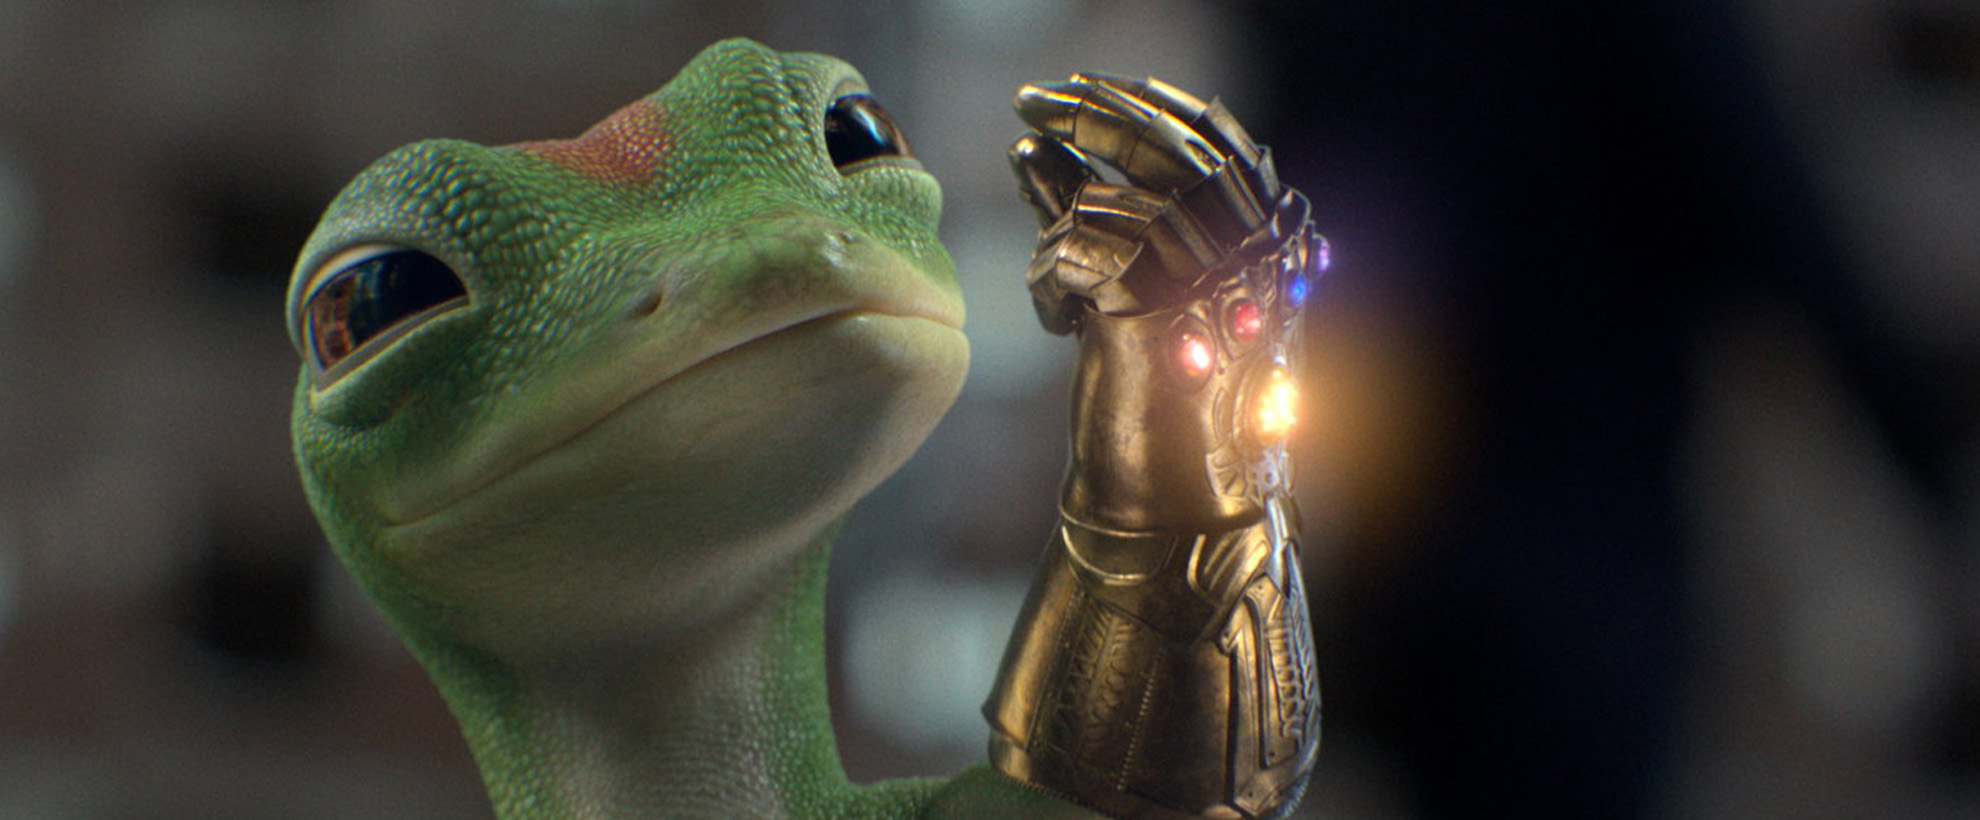 The GEICO gecko wears the Thanos gold armor glove with several different colored stones (aka Infinity Stones) 